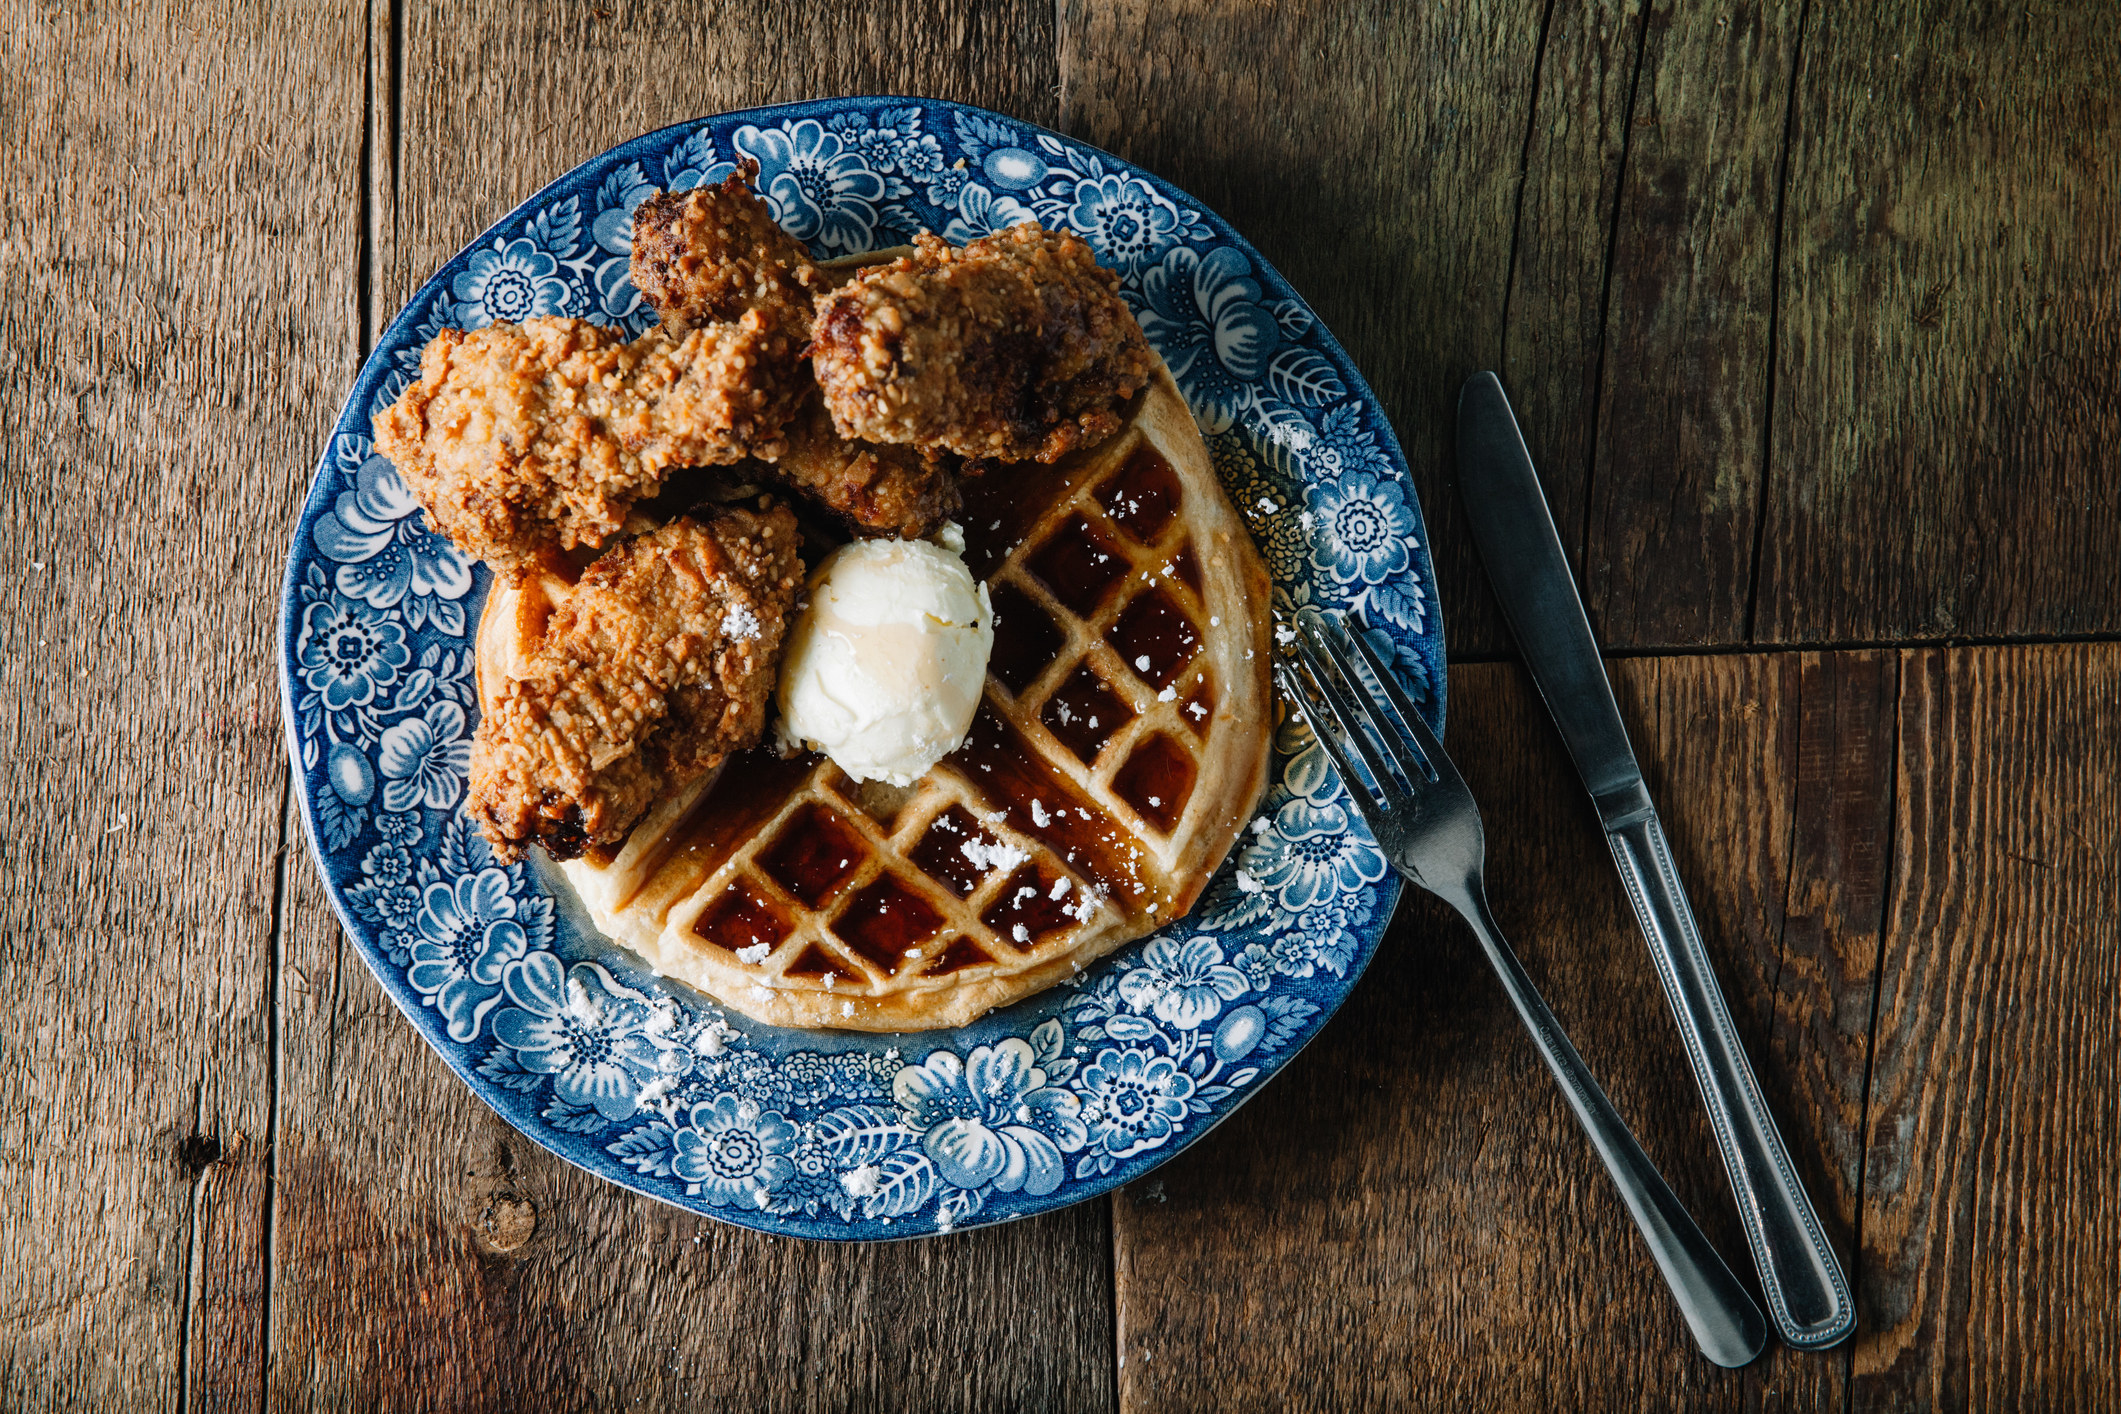 Chicken wings and waffles served with butter.